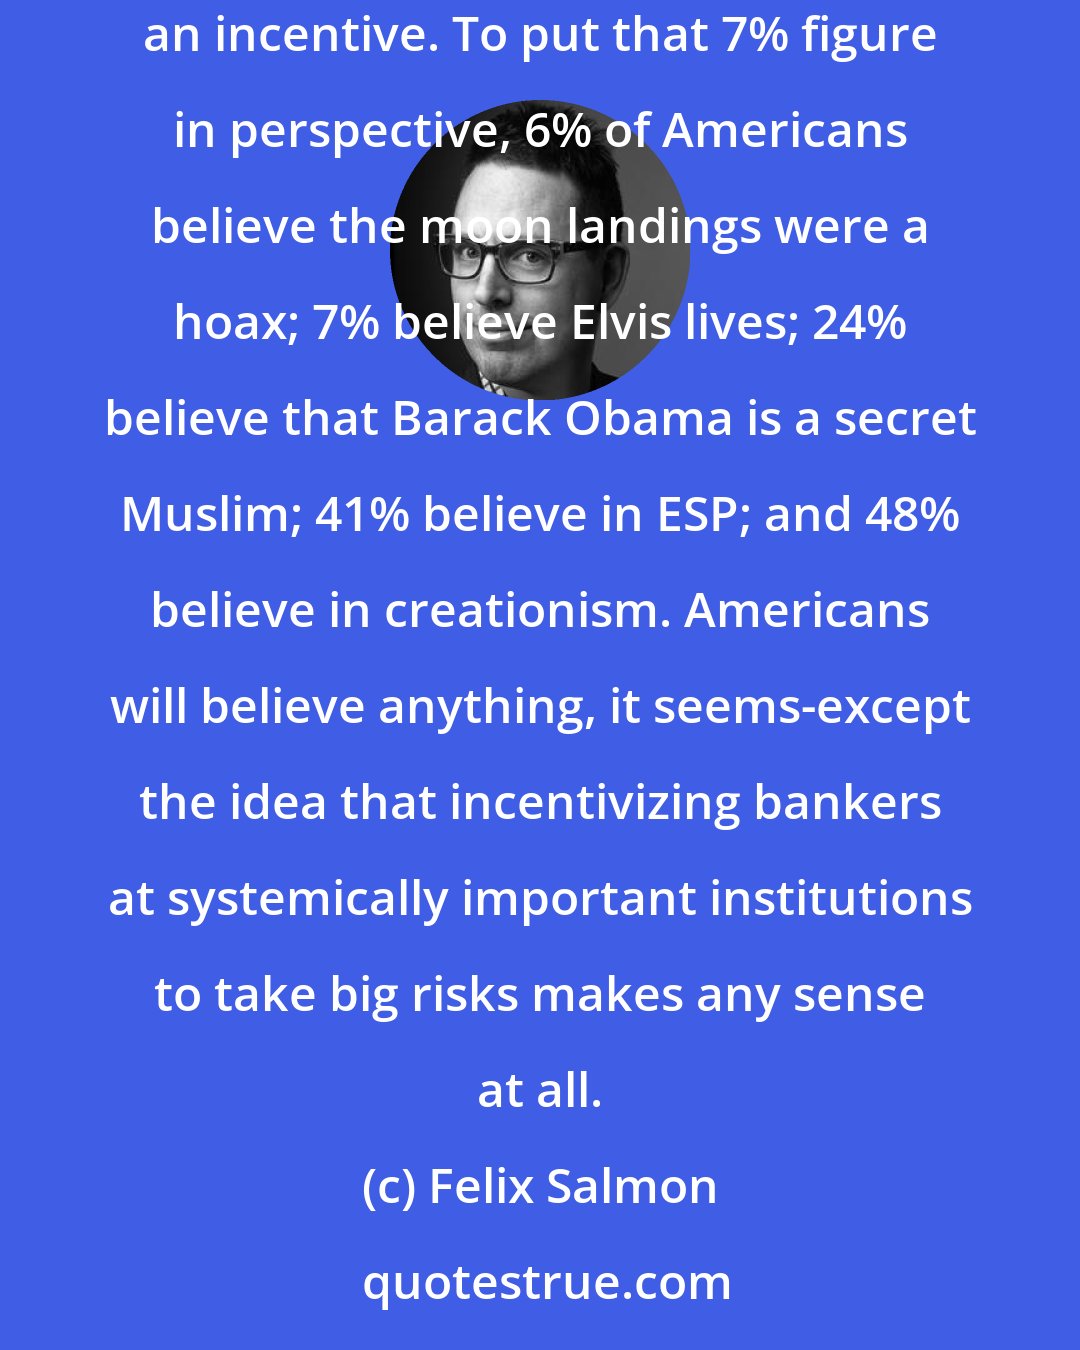 Felix Salmon: In a Bloomberg poll, 88% of respondents said that Wall Street bonuses should either be banned outright or taxed at 50%. Just 7% said they should remain an incentive. To put that 7% figure in perspective, 6% of Americans believe the moon landings were a hoax; 7% believe Elvis lives; 24% believe that Barack Obama is a secret Muslim; 41% believe in ESP; and 48% believe in creationism. Americans will believe anything, it seems-except the idea that incentivizing bankers at systemically important institutions to take big risks makes any sense at all.